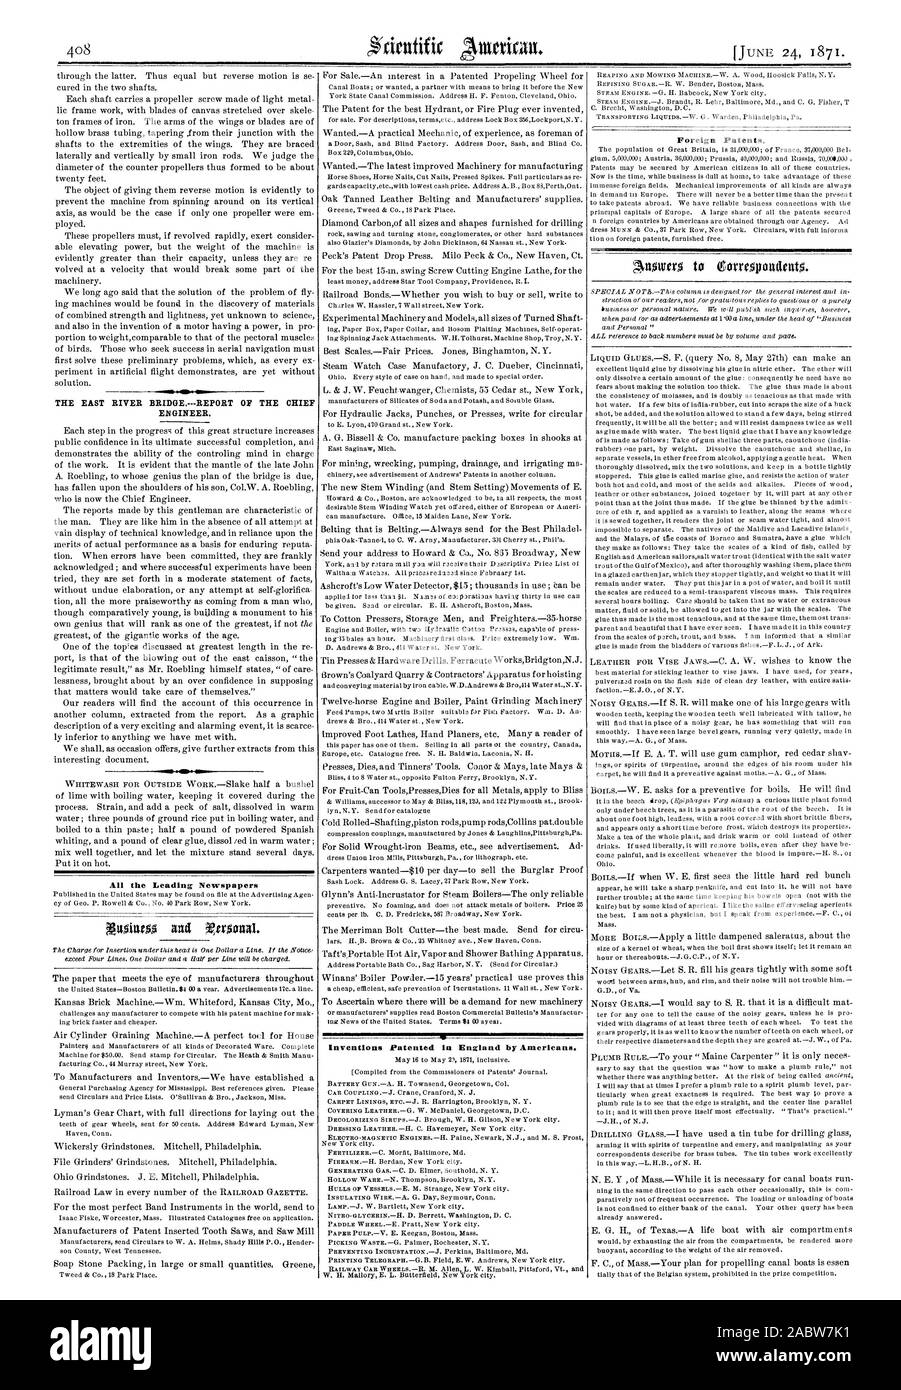 All the Leading Newspapers Inventions Patented in England by Americans. Foreign Patents, scientific american, 1871-06-24 Stock Photo